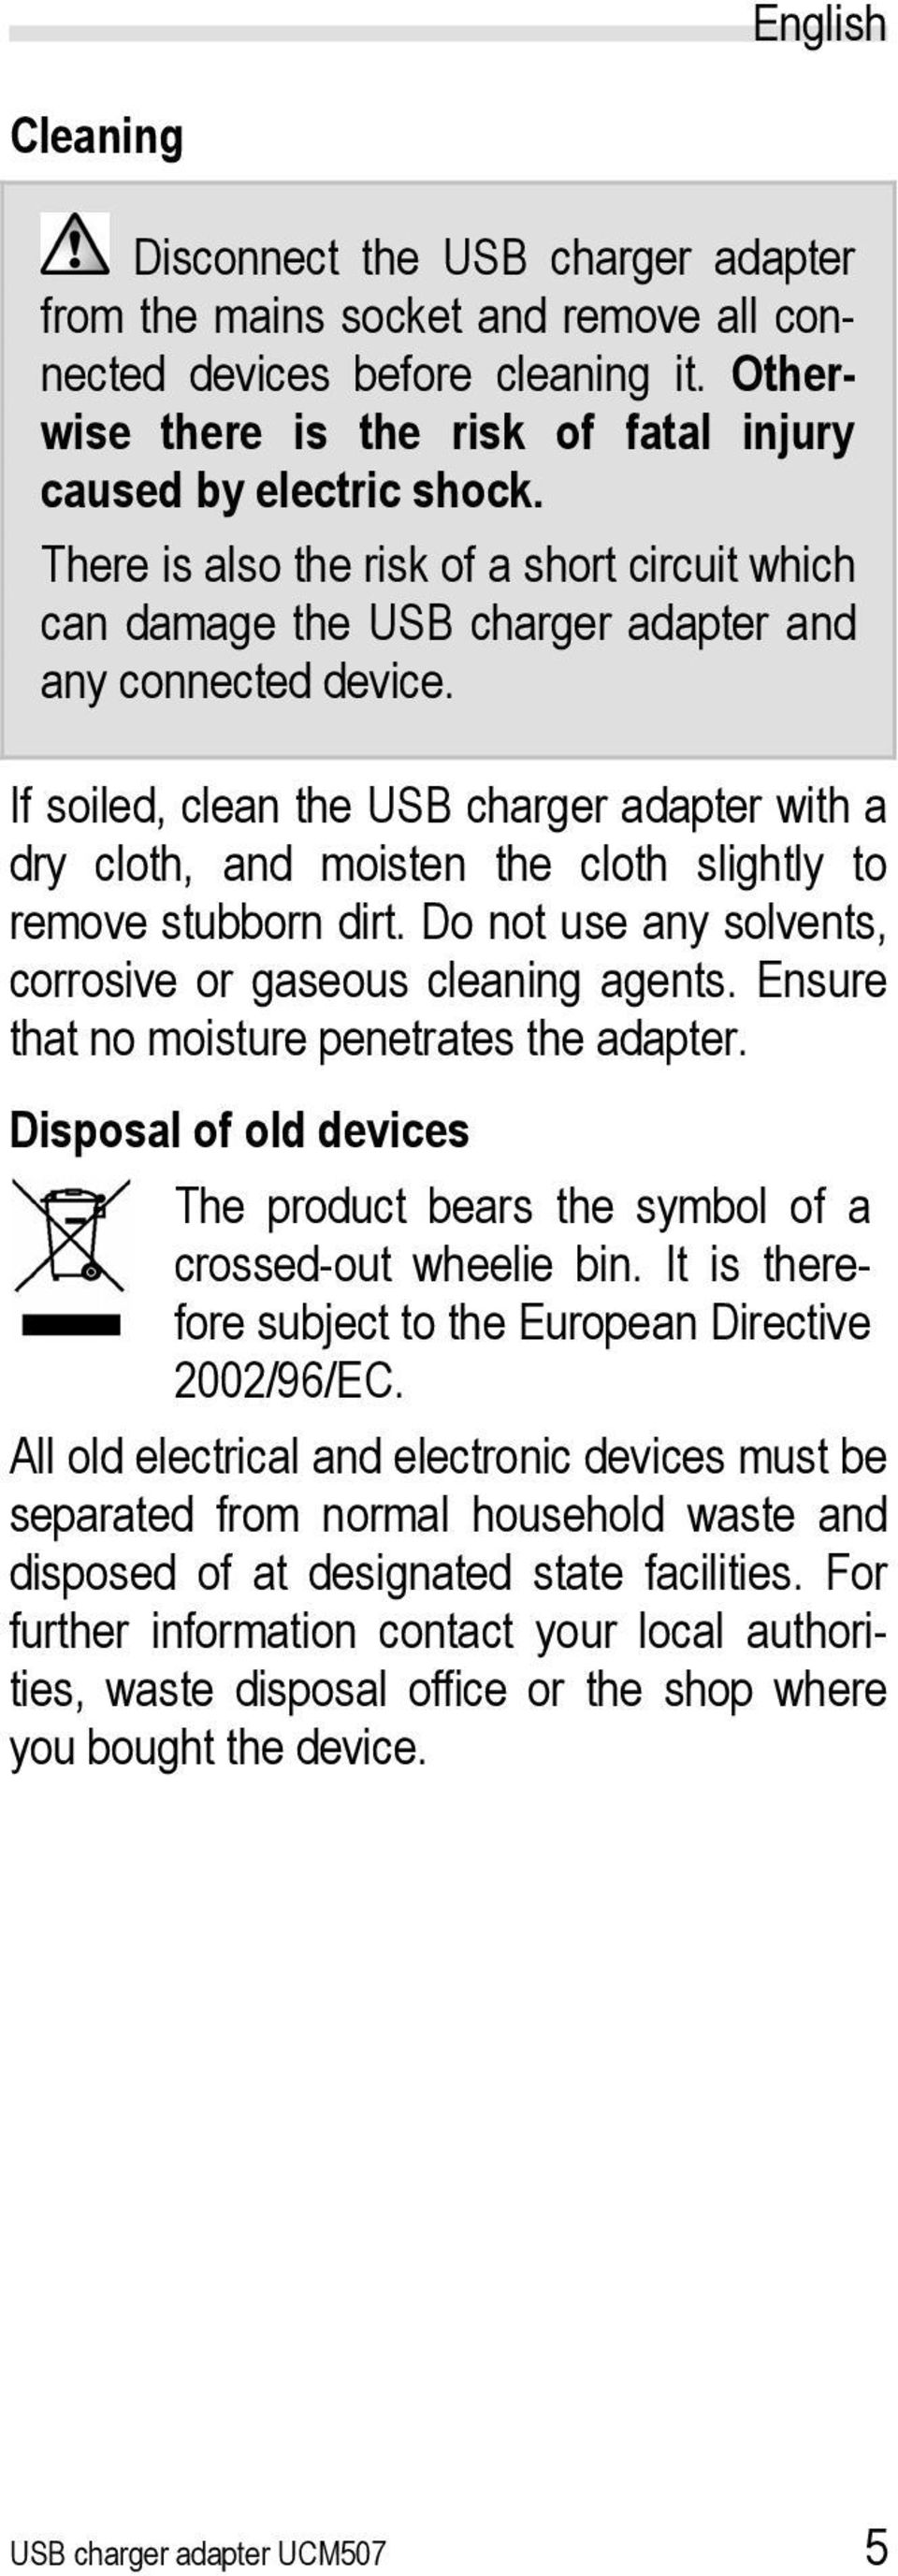 If soiled, clean the USB charger adapter with a dry cloth, and moisten the cloth slightly to remove stubborn dirt. Do not use any solvents, corrosive or gaseous cleaning agents.